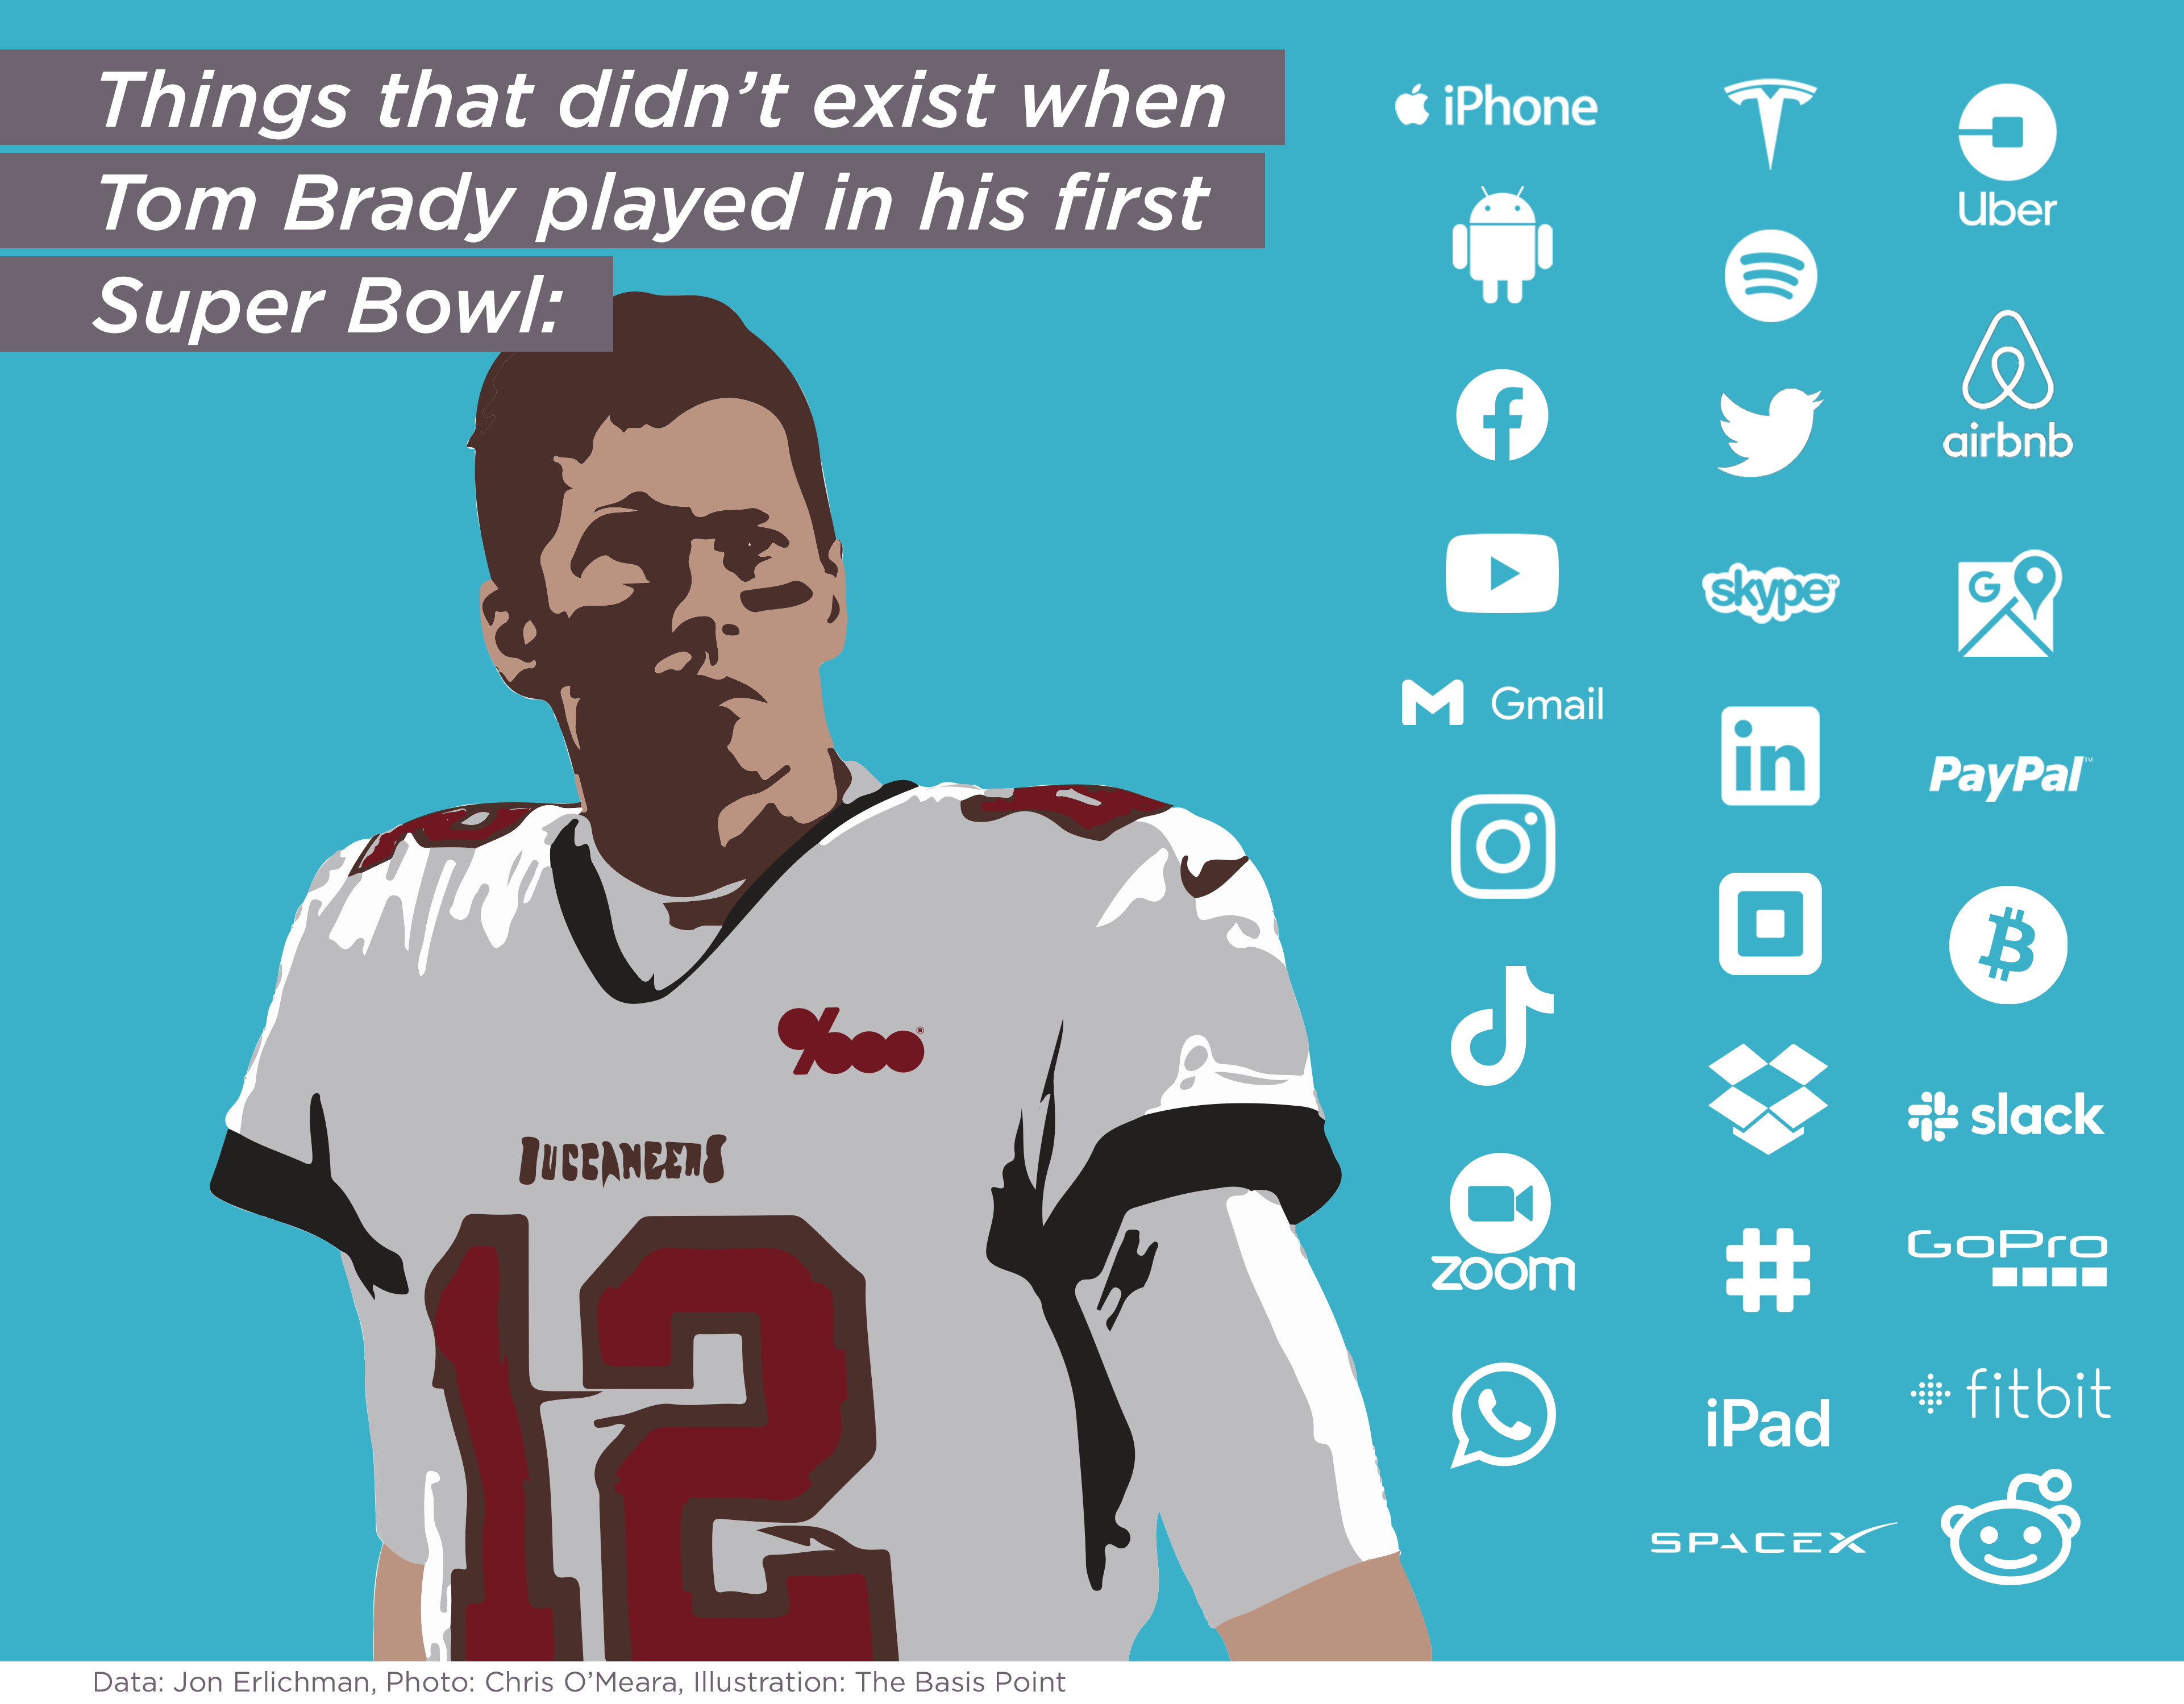 Consumer Technology and Apps That Didn't Exist When Tom Brady Played In His First Super Bowl - The Basis Point